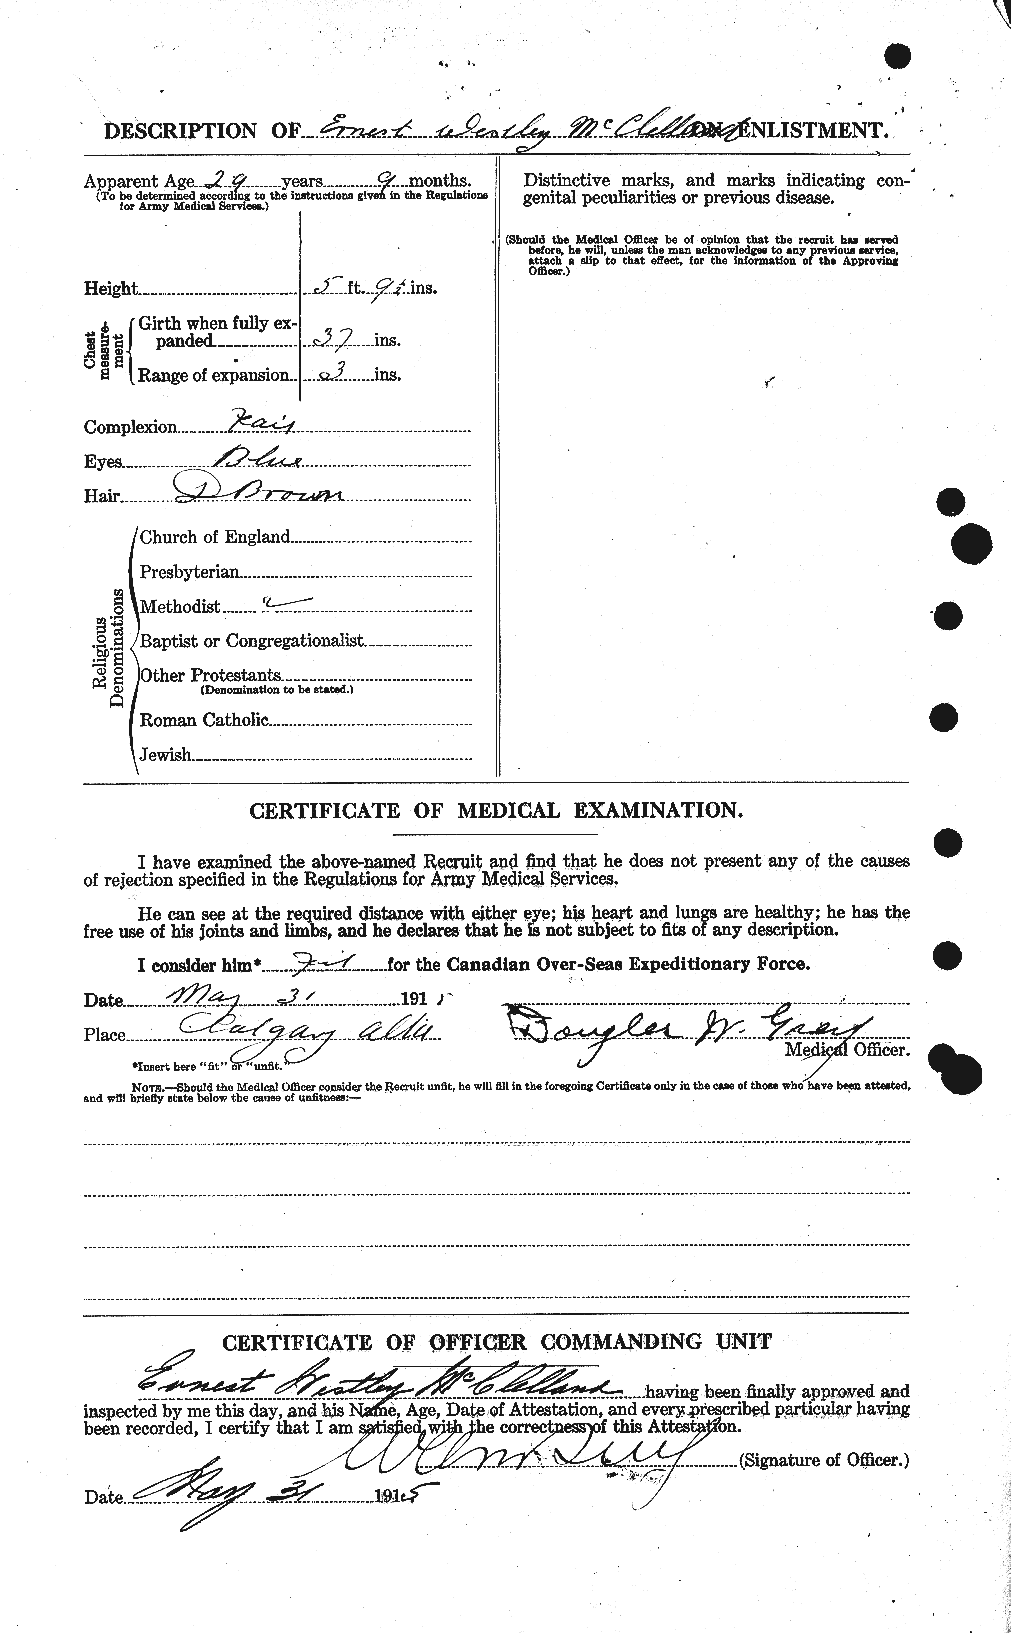 Personnel Records of the First World War - CEF 135253b